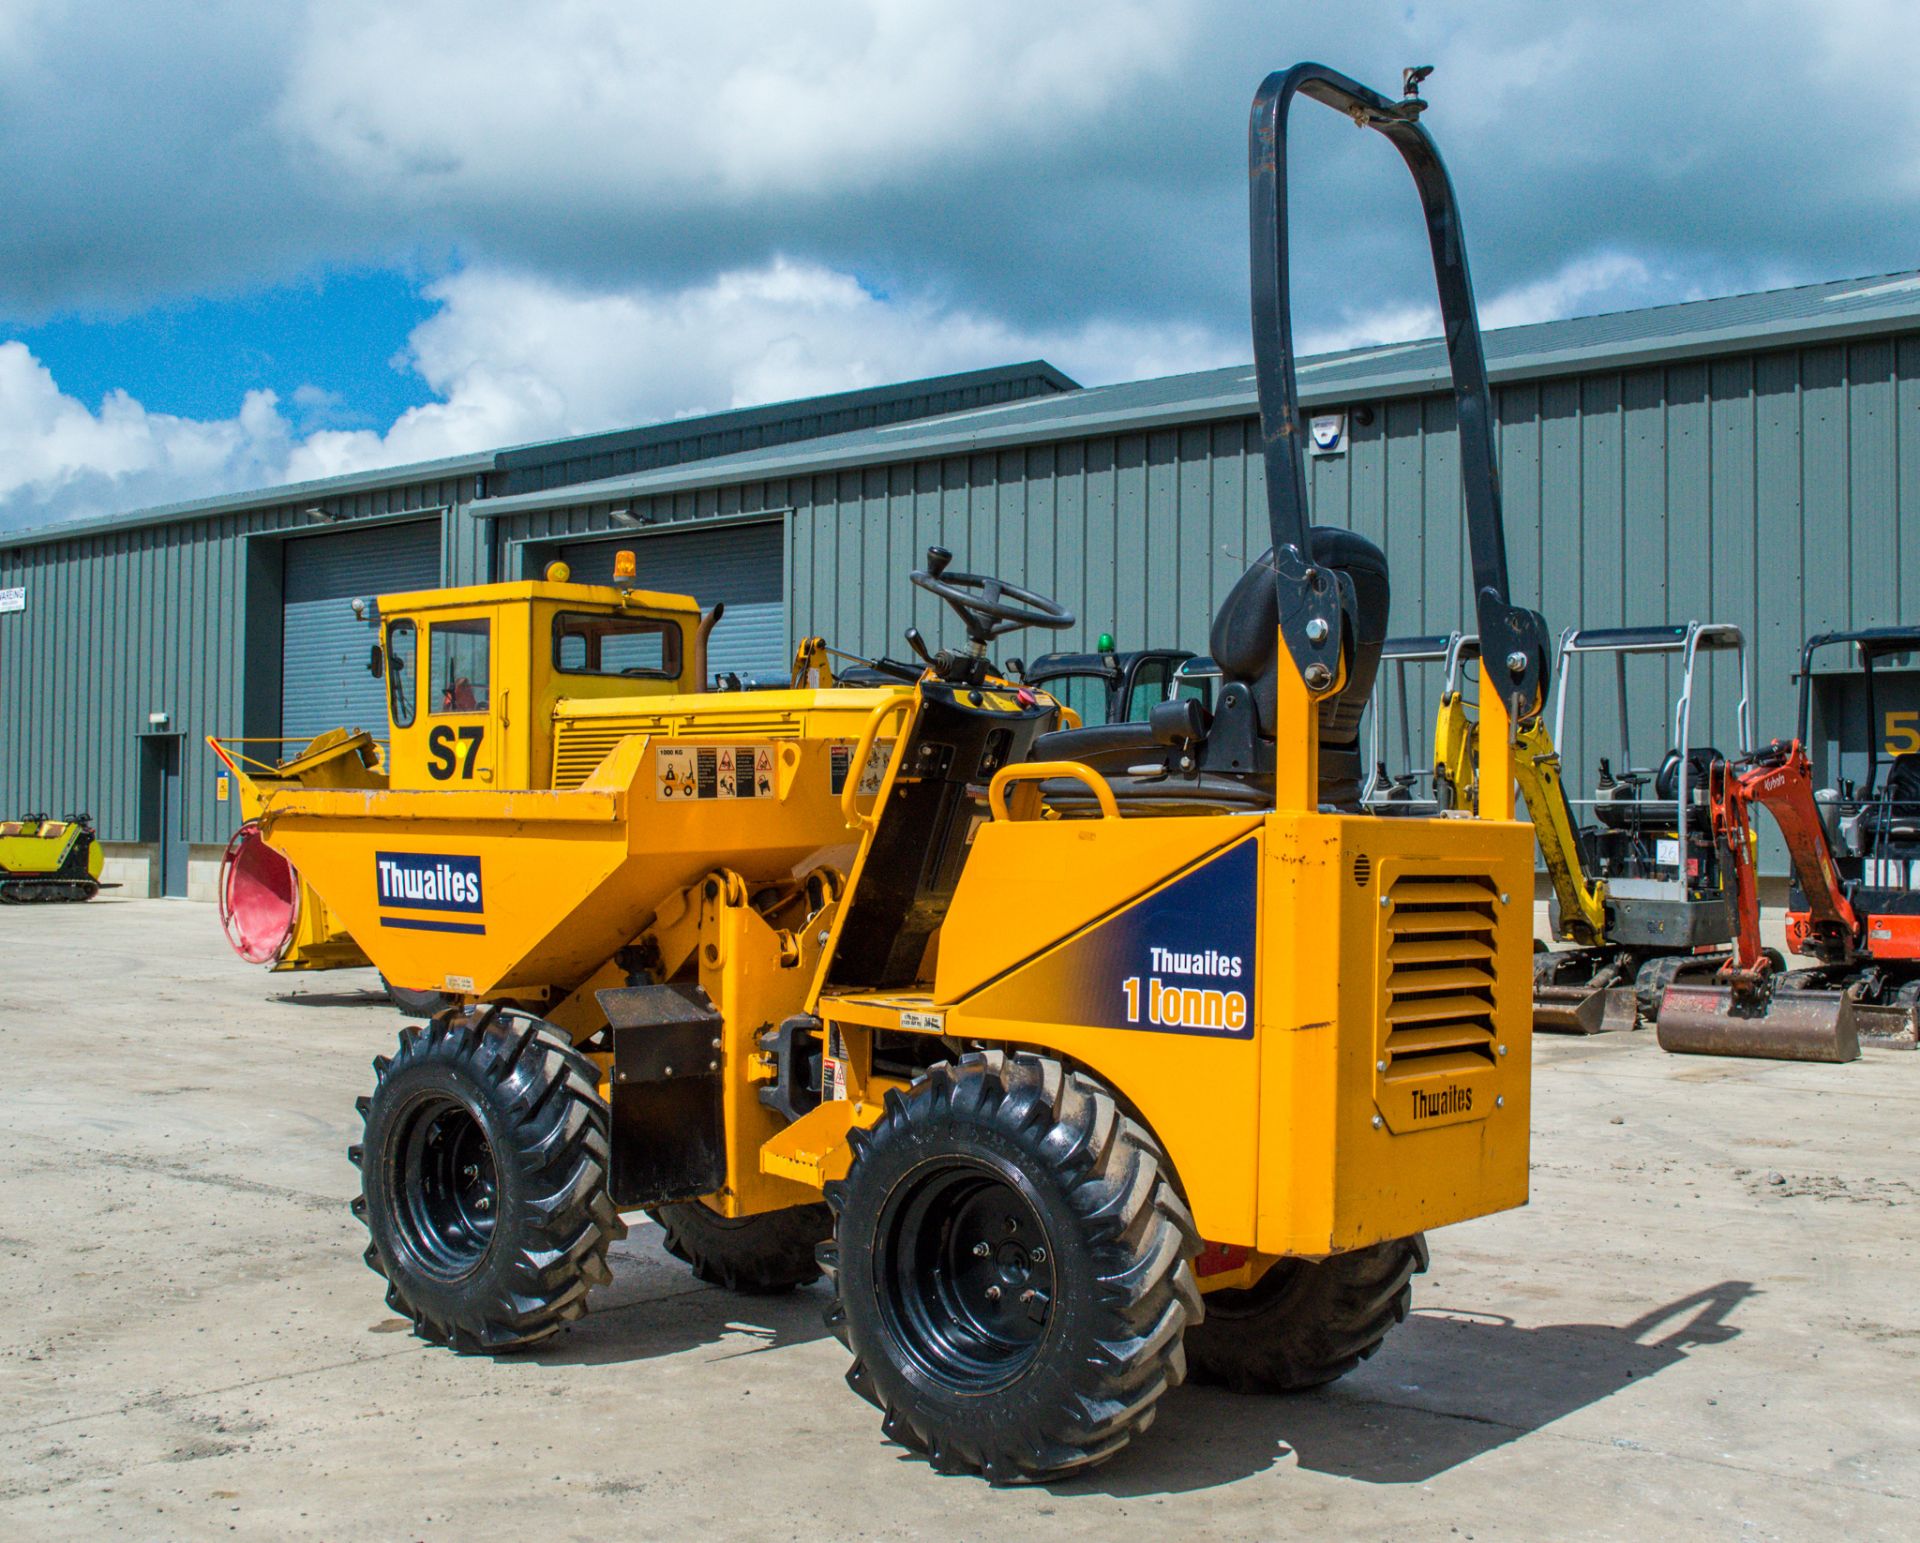 Thwaites 1 tonne high tip dumper Year: 2018 S/N: E3649 Recorded hours: 441 XL187003 - Image 4 of 21